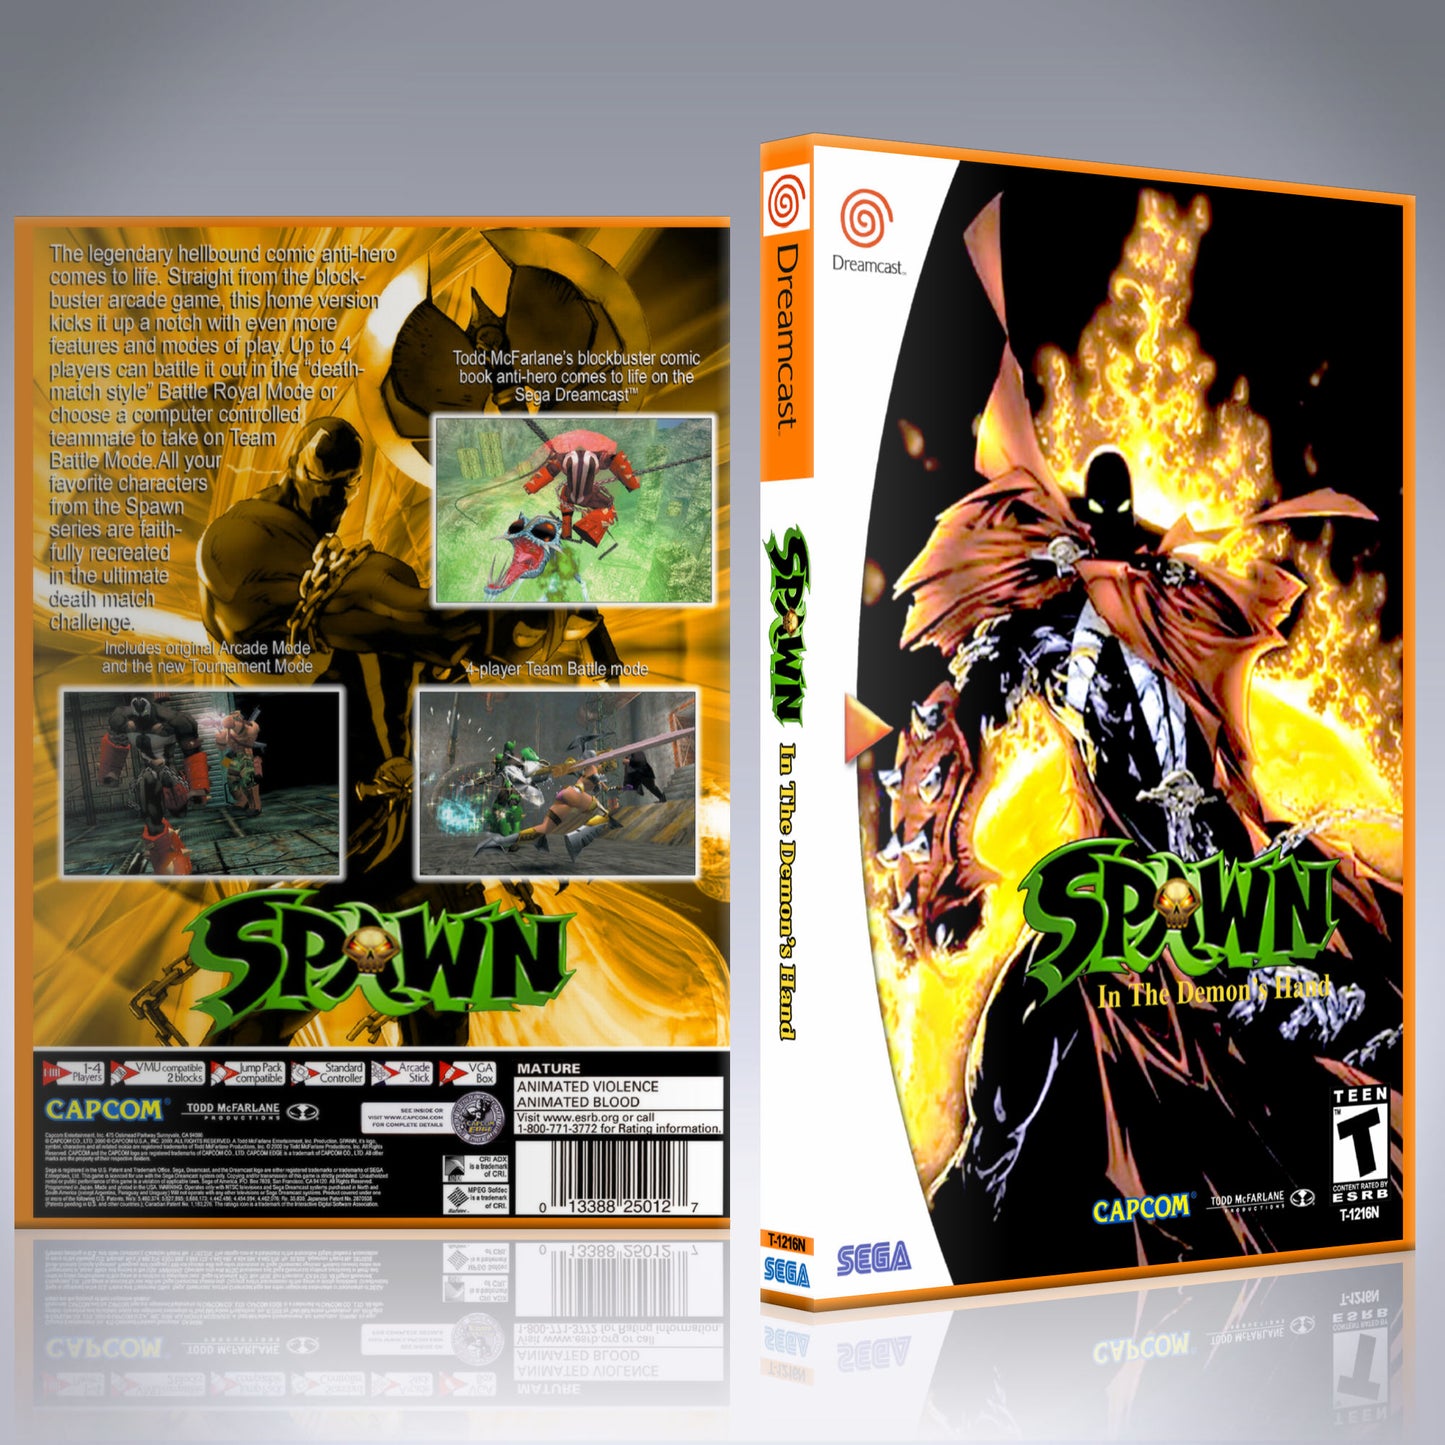 Dreamcast Custom Case - NO GAME - Spawn - In the Demon's Hand